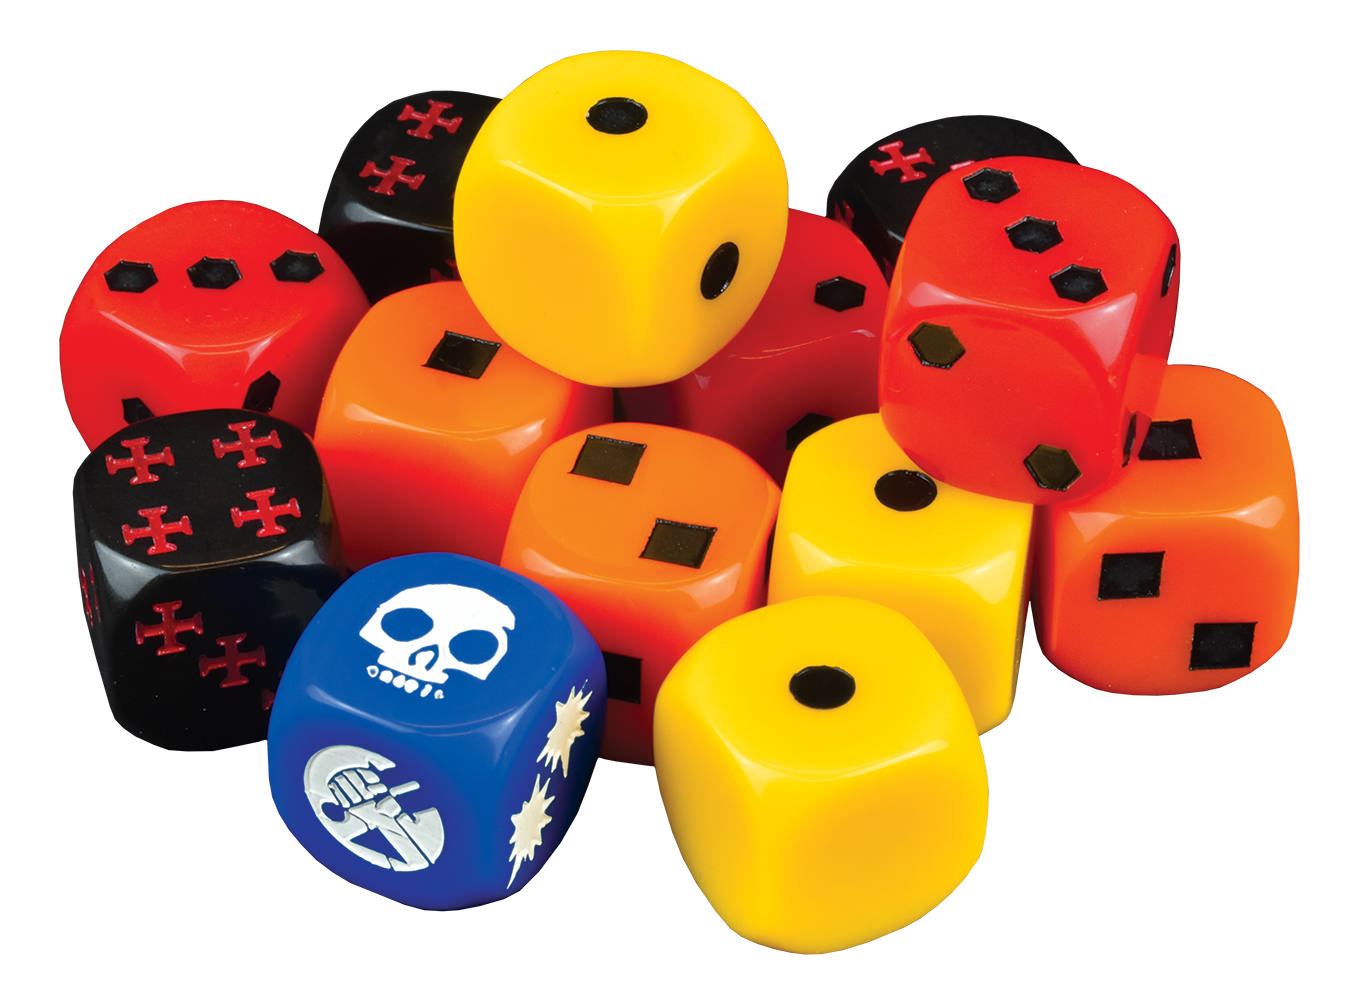 Hellboy:The Board Game – Dice Booster